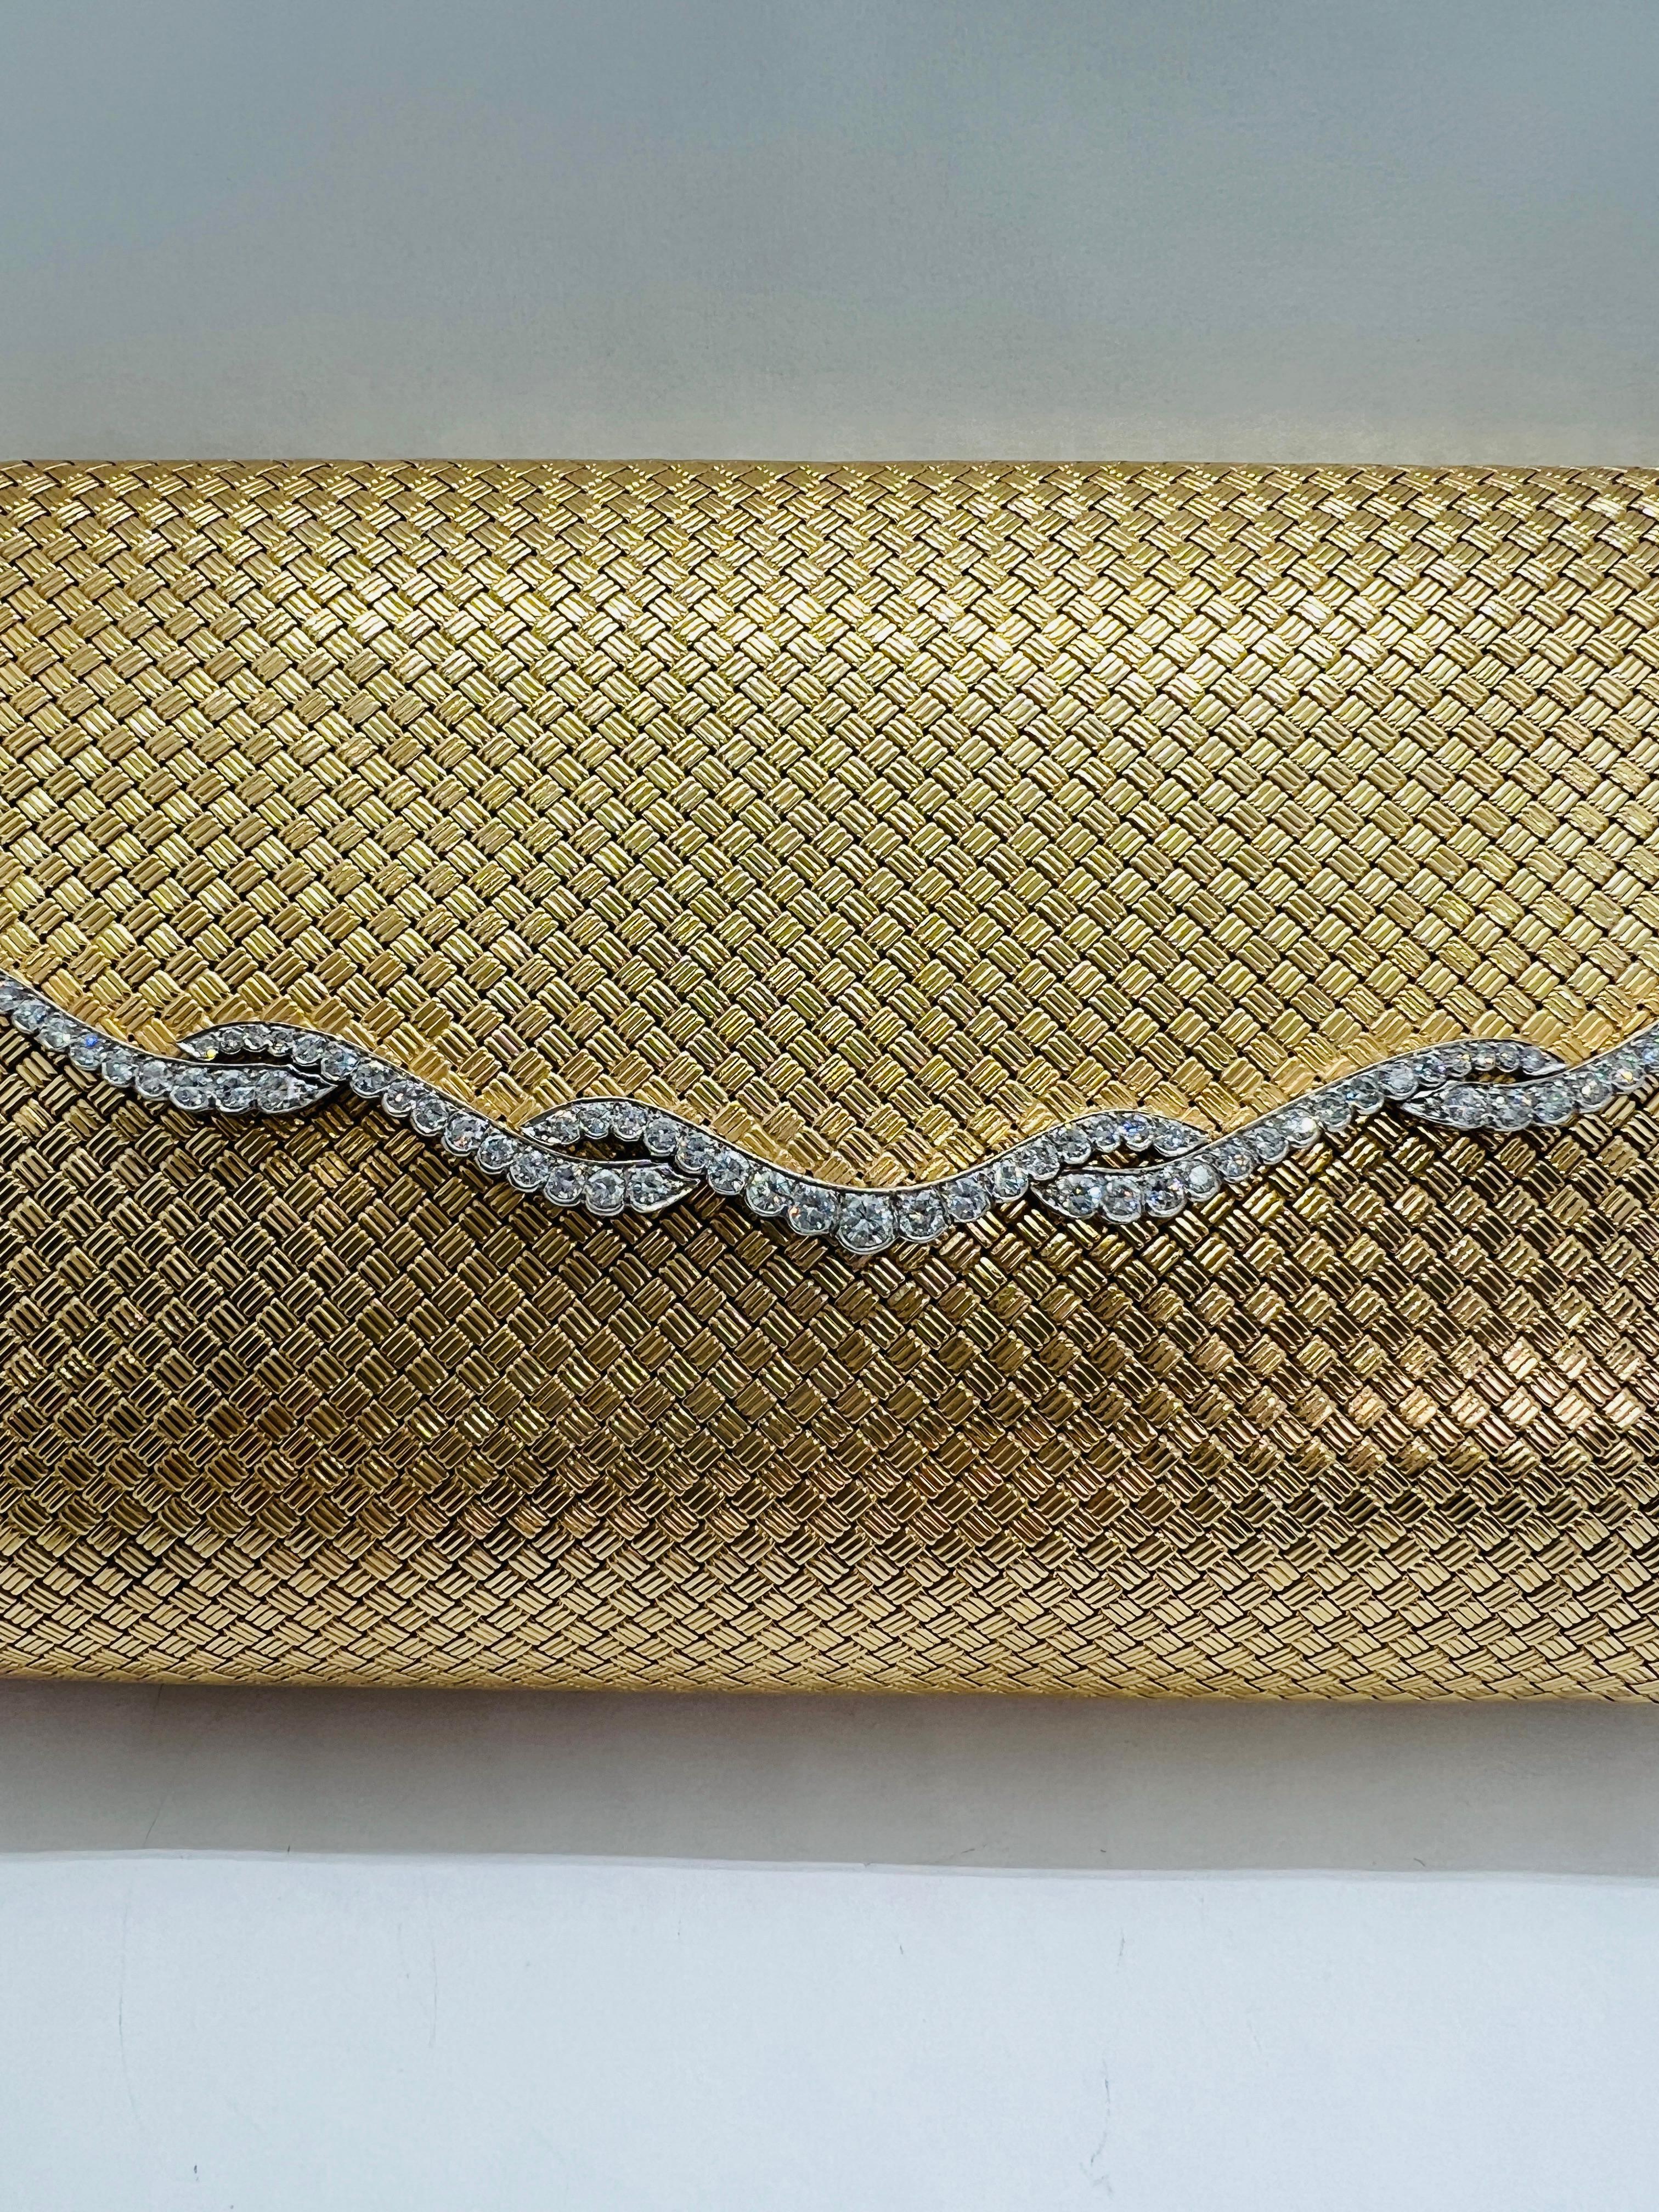 Absolutely Stunning 14K Yellow Gold and Diamond Clutch Purse! The purse measures 6.5 inches by 4 inches and weighs 483 grams! There are 80 Diamonds estimated to weigh 3.50 carats and are G-H in color and VS2 Clarity. The inside is lined in black